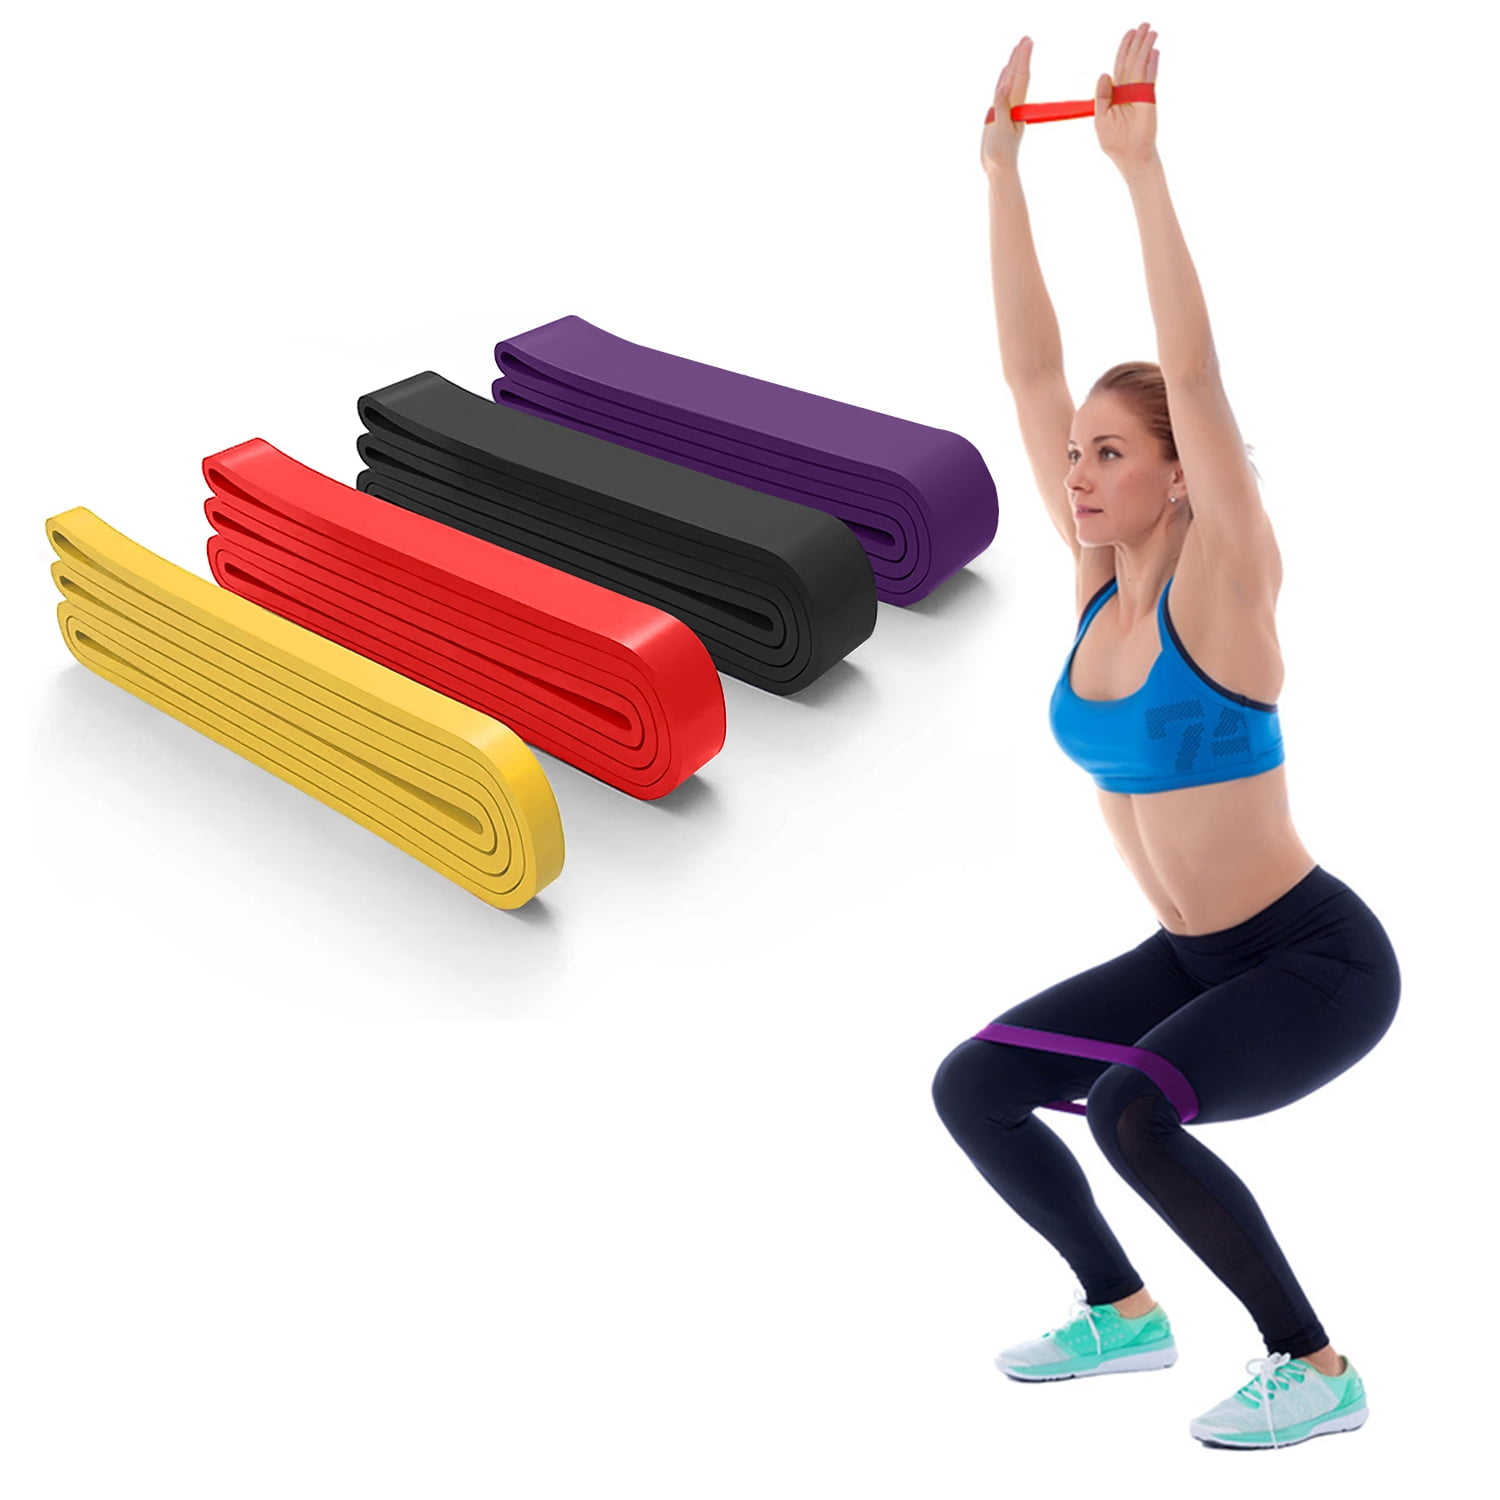 iMounTEK Resistance Loop Band for Legs and Butt Exercise Bands - Yoga Power  Lifting, 4 Colors Women Sports Fitness Band 